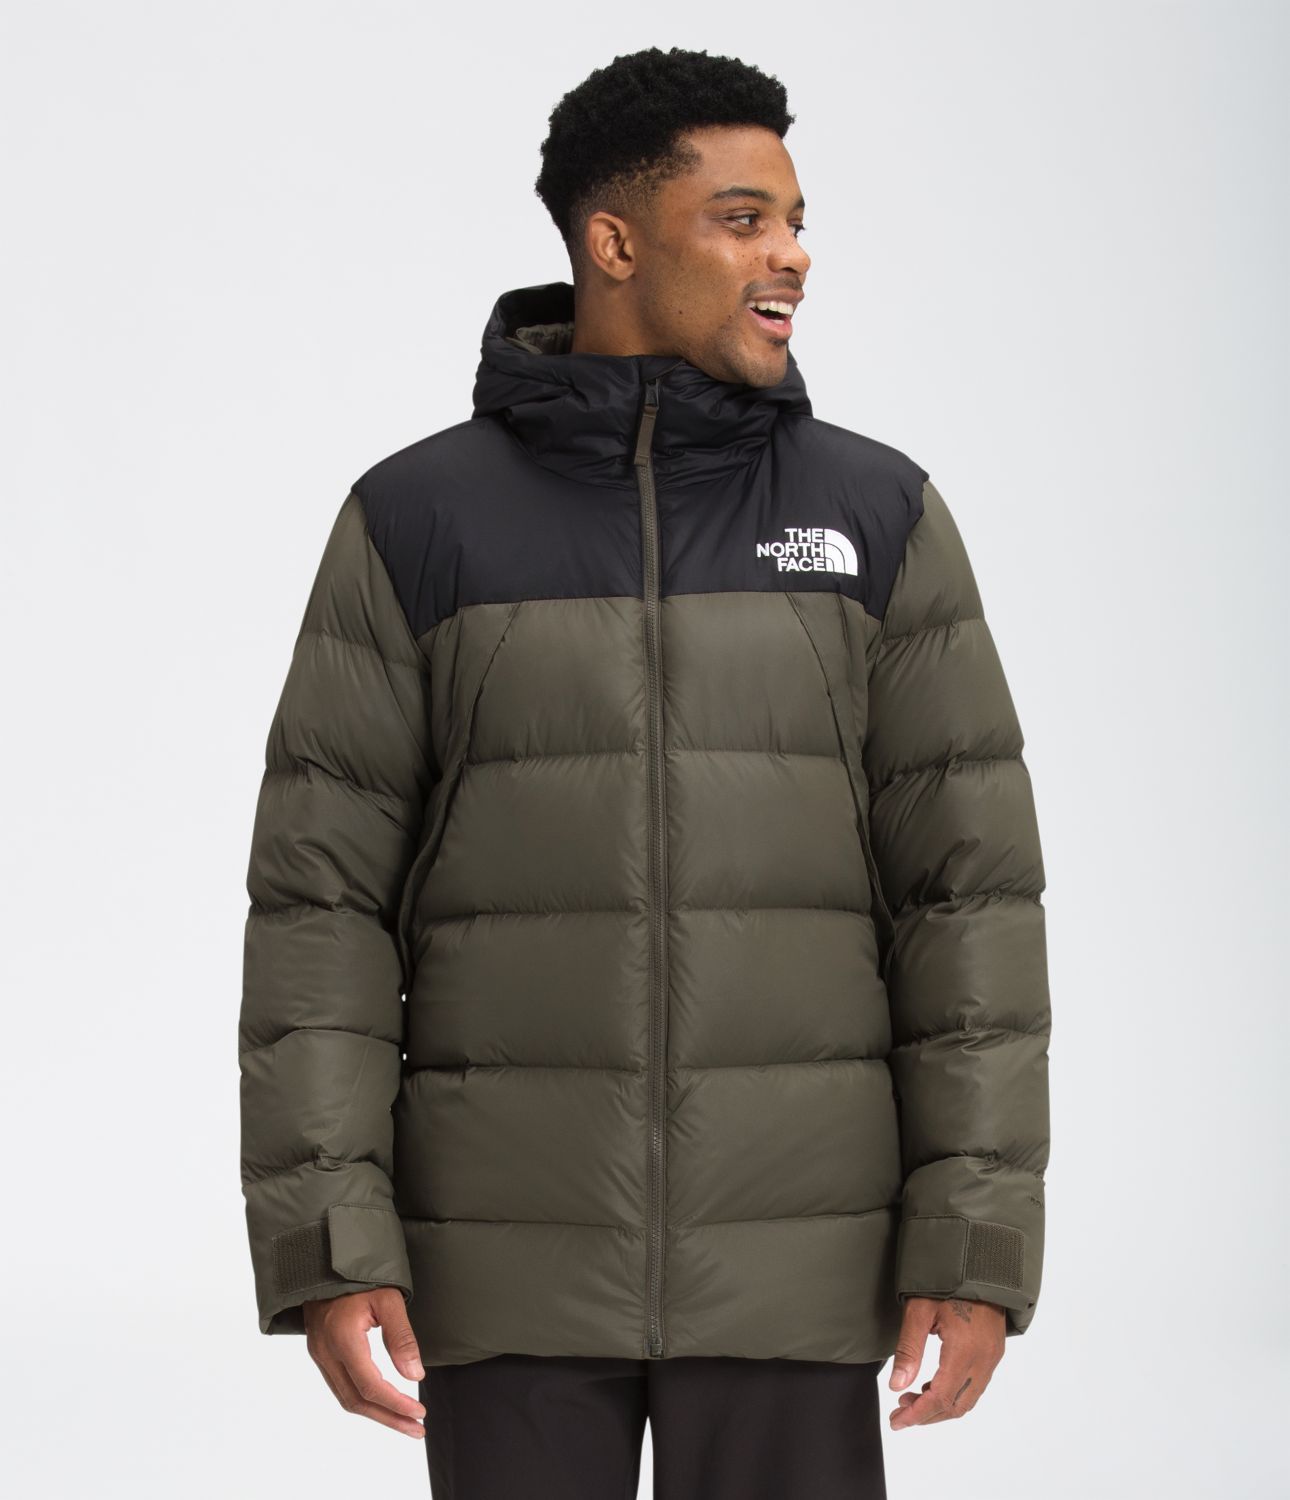 You can now shop all of North Face's Black Friday deals